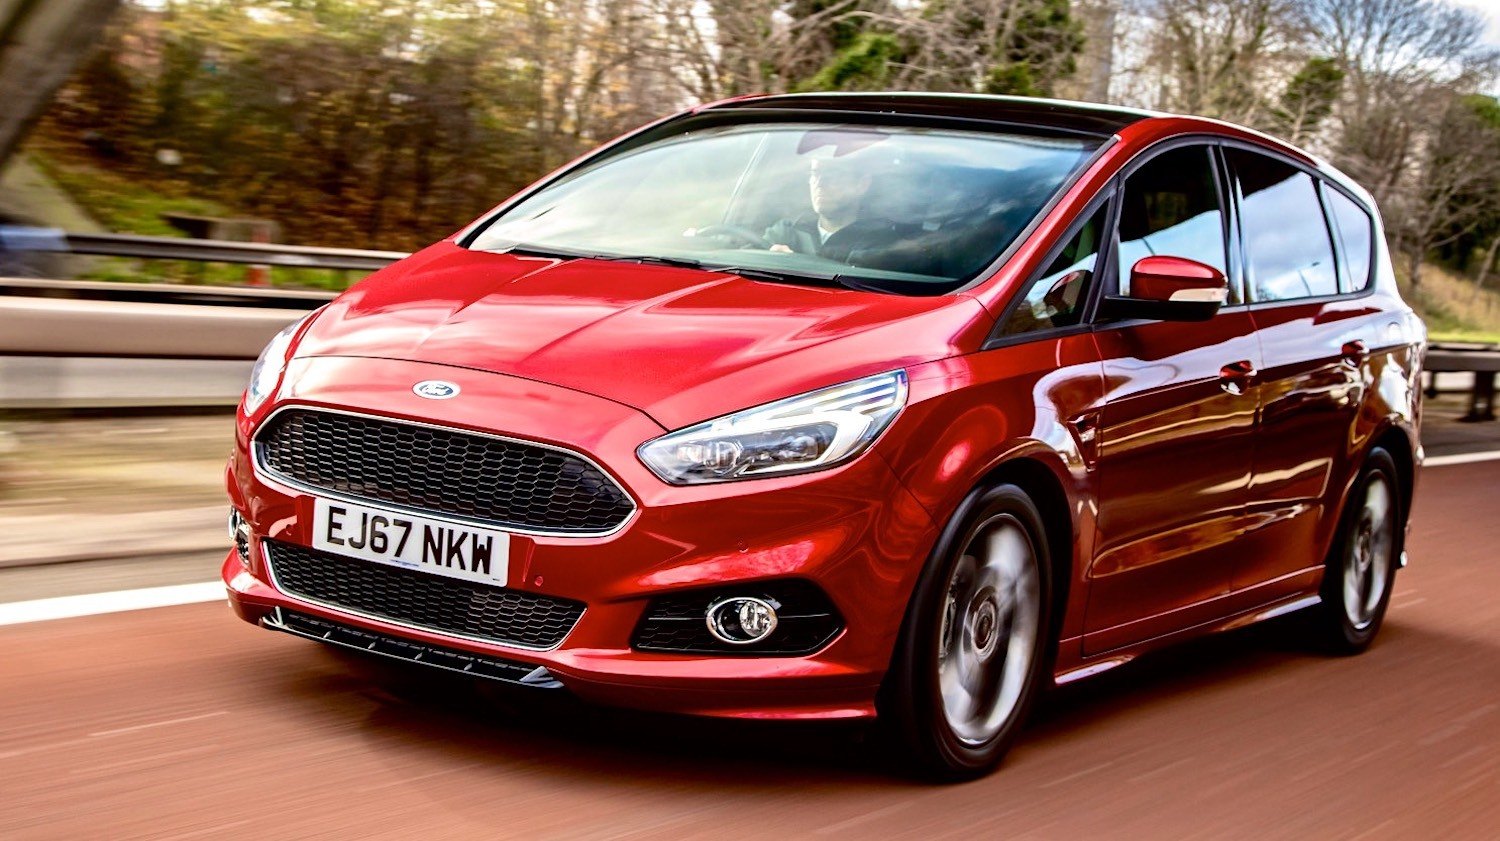 Drive.co.uk Ford SMax MPV 2018 Review